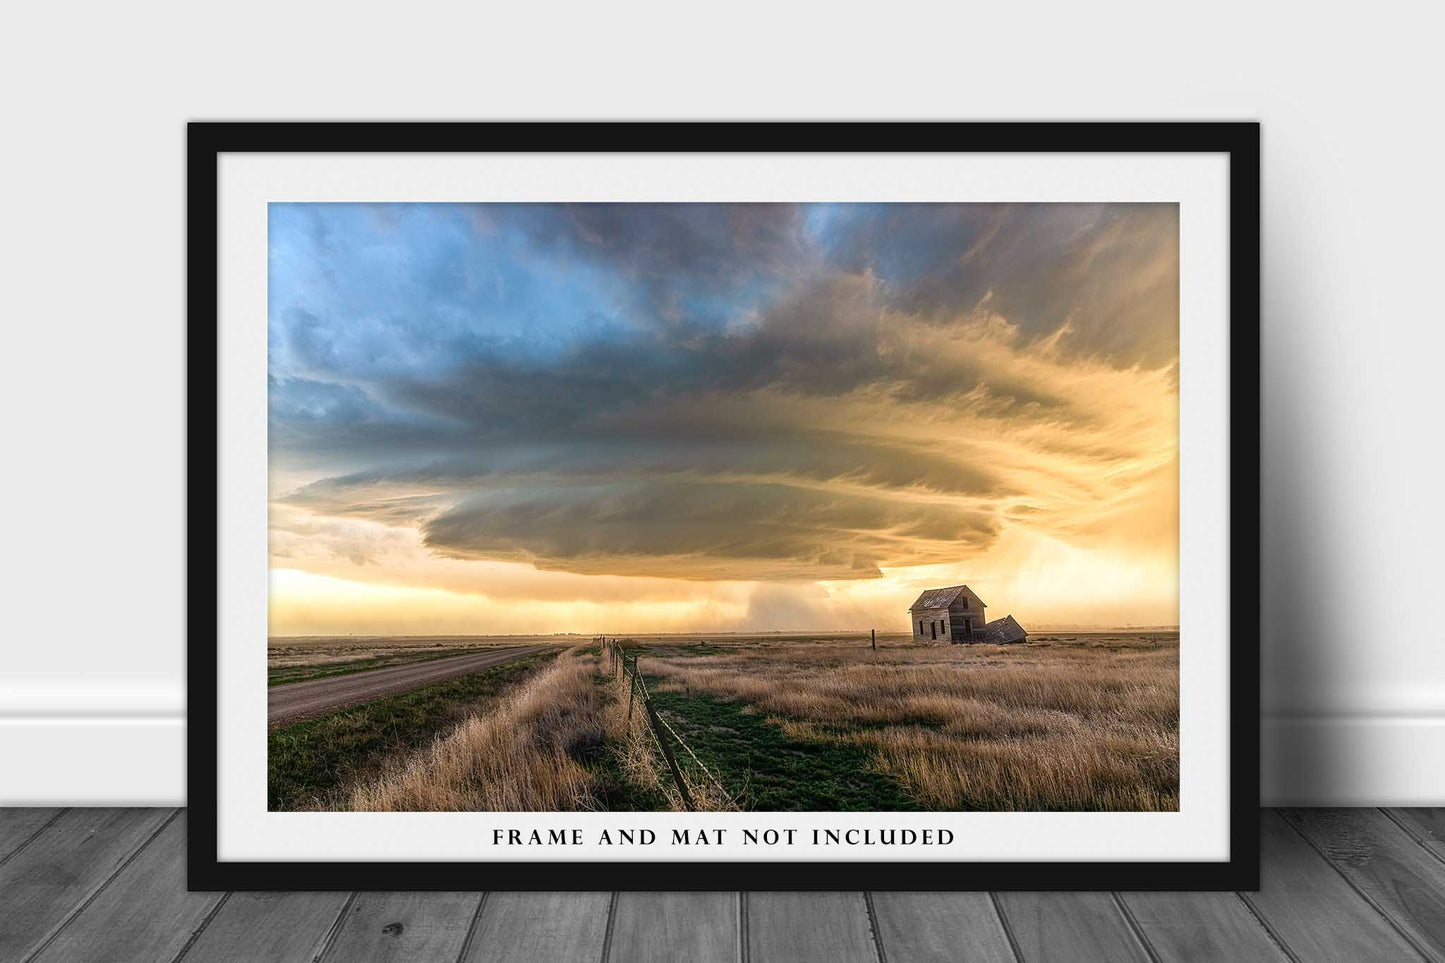 Storm Photography Print - Picture of Supercell Thunderstorm Over Abandoned House on Spring Evening in Colorado - Weather Wall Art Decor